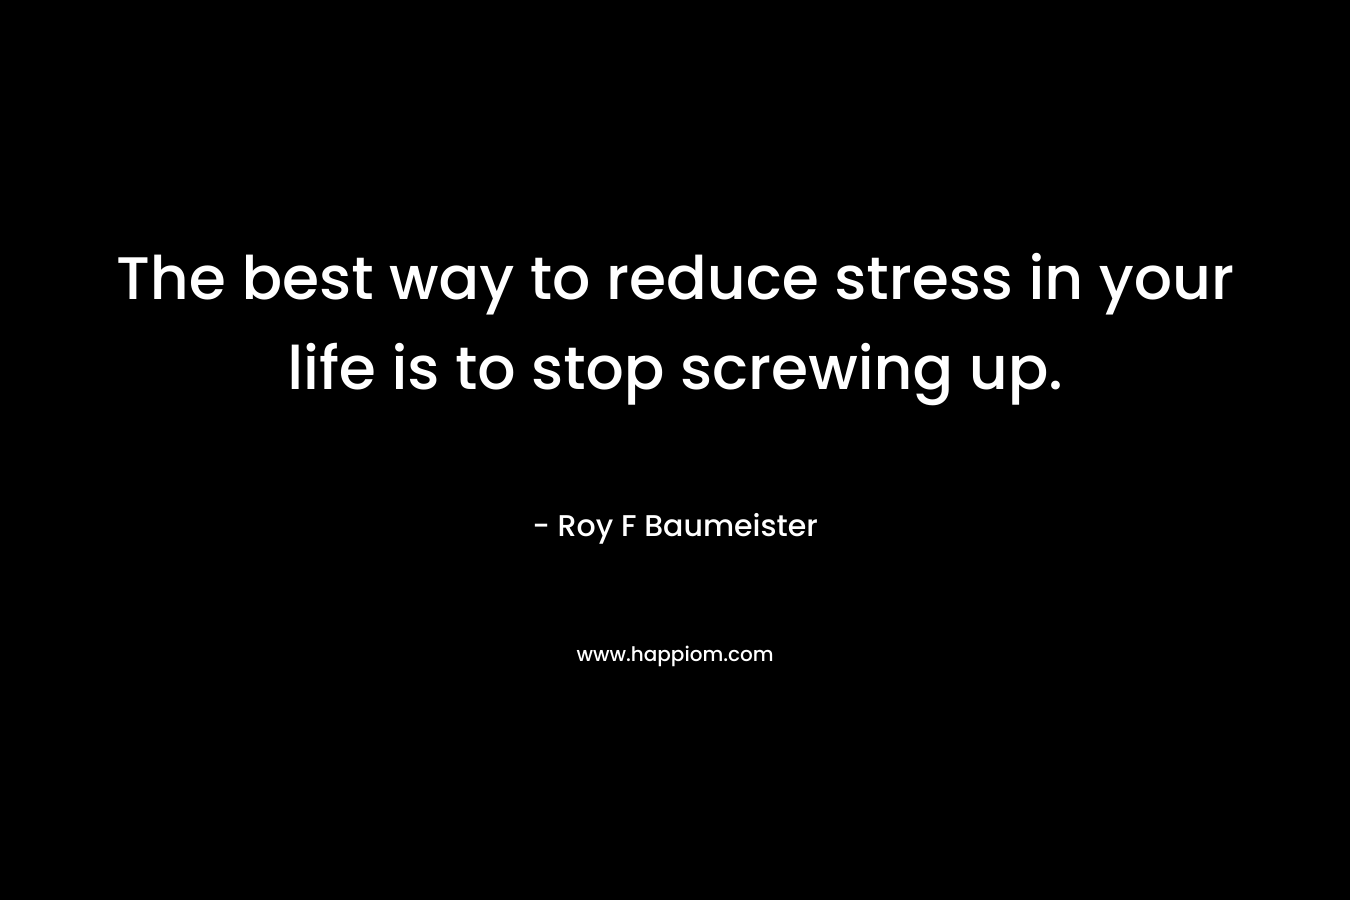 The best way to reduce stress in your life is to stop screwing up.